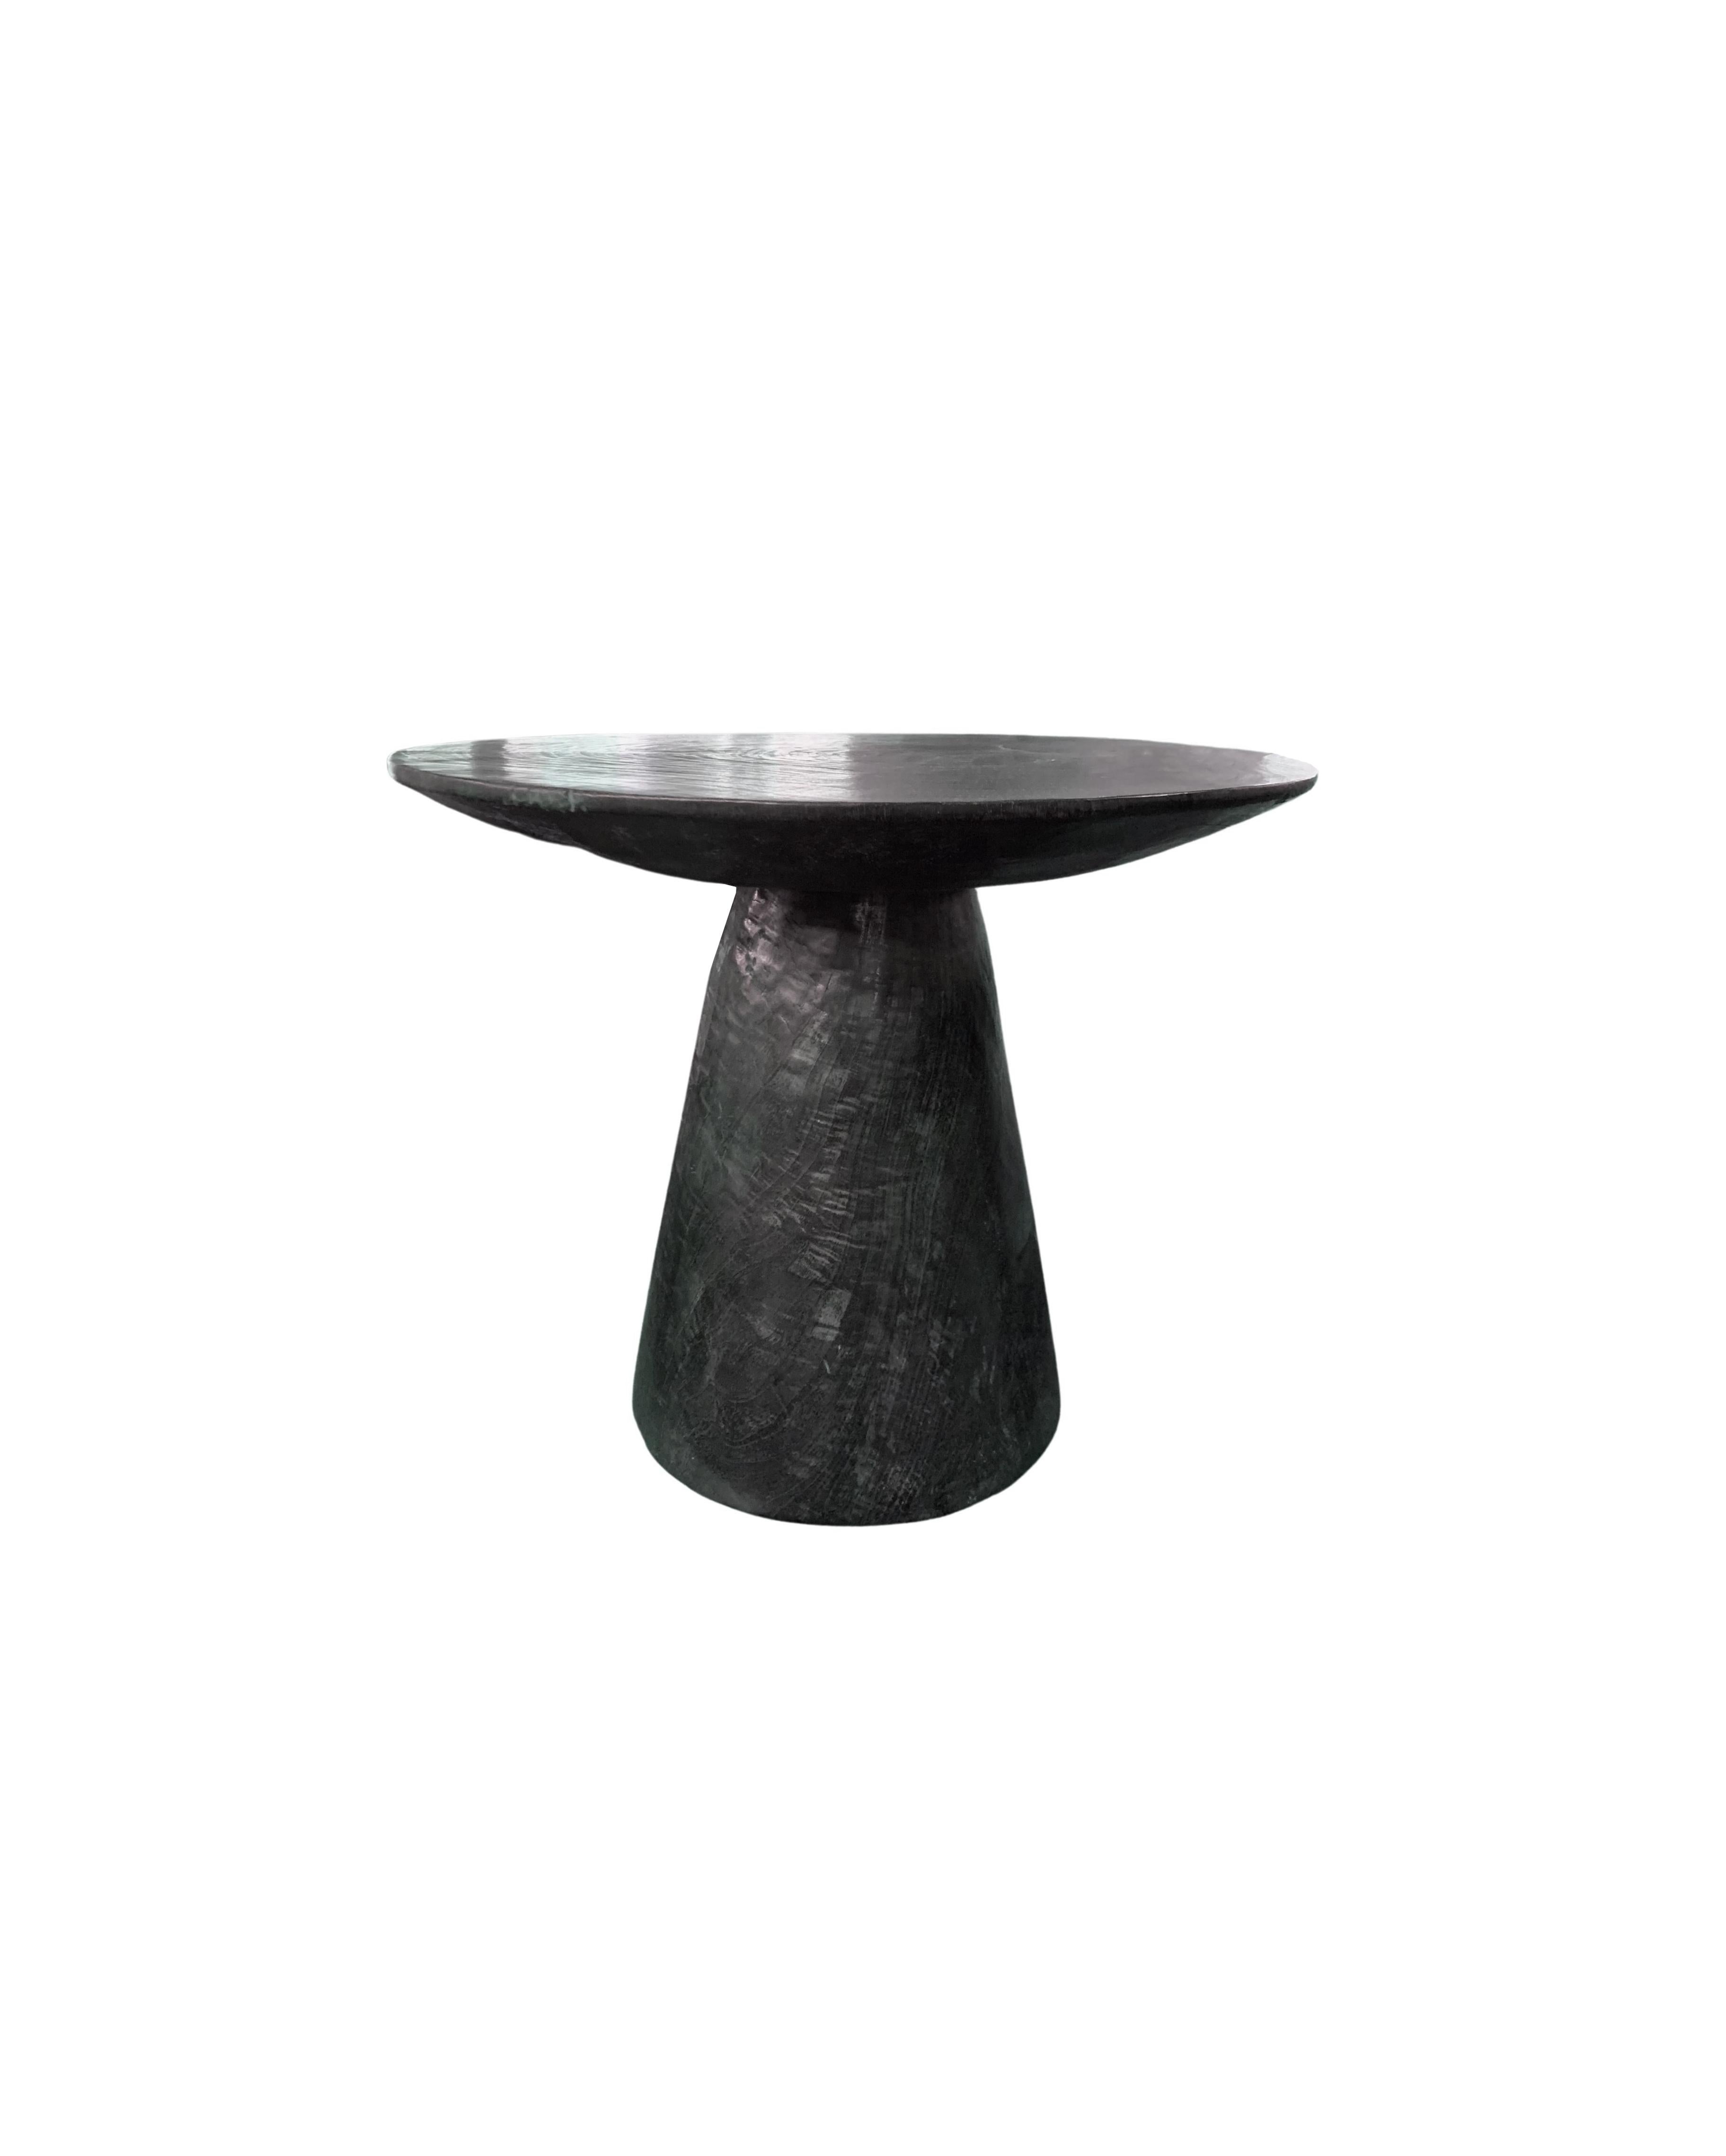 Organic Modern Sculptural Round Table Crafted from Mango Wood, Burnt Finish, Modern Organic For Sale